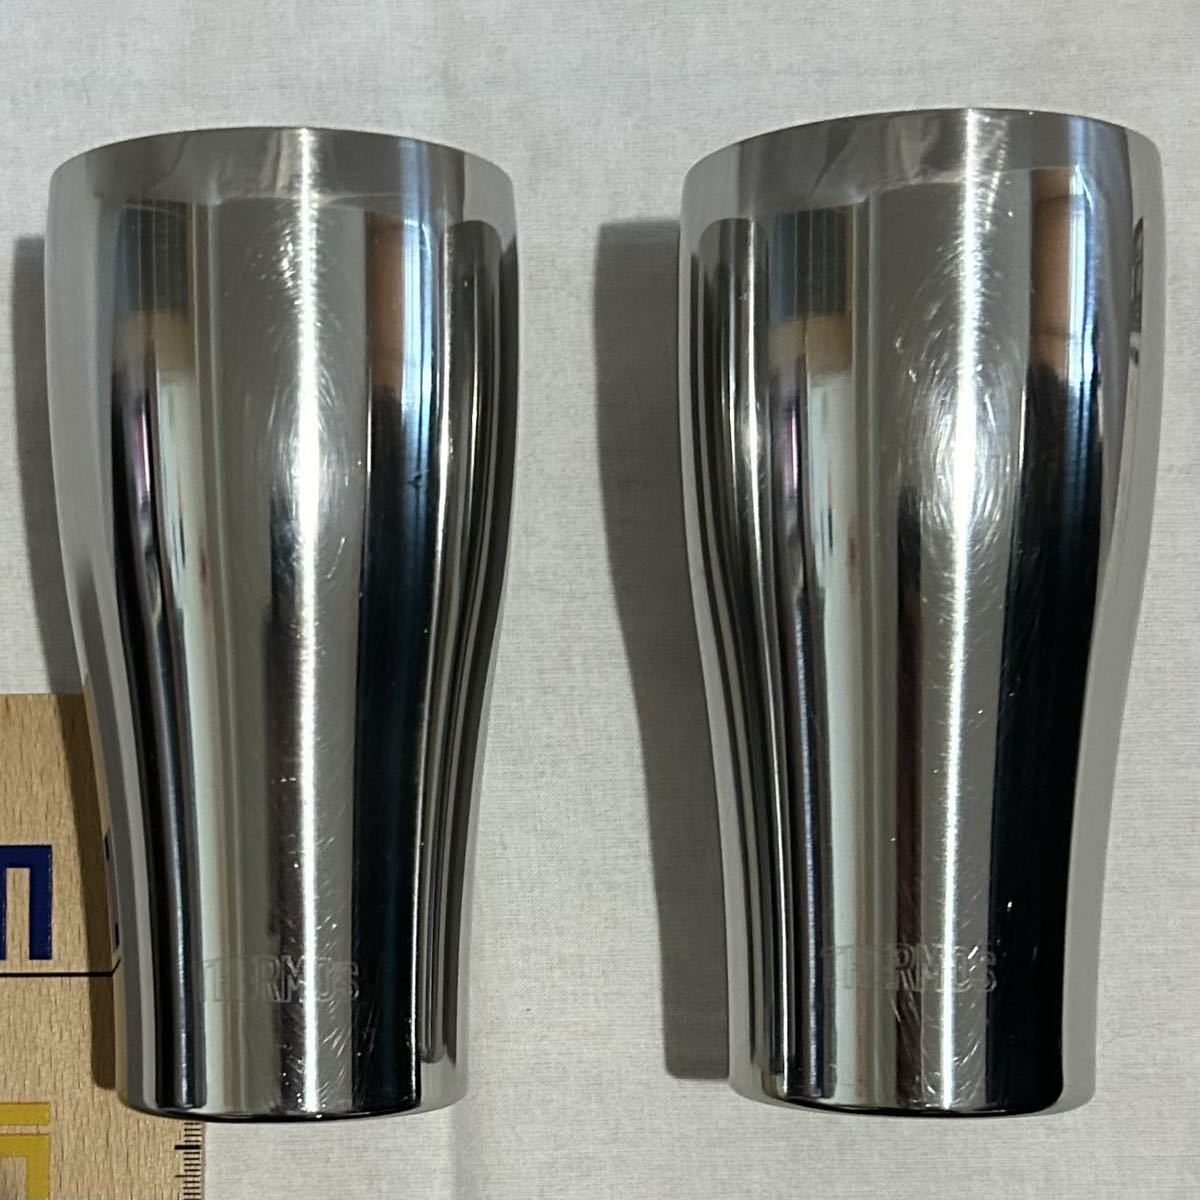 ★THERMOS★真空断熱タンブラー★JCY-400(SM) 052612CA★2個セット★STAINLESS STEEL MIRROR★アメトーーク！千原ジュニアさん紹介★400ml_正面(下部にロゴ刻印)